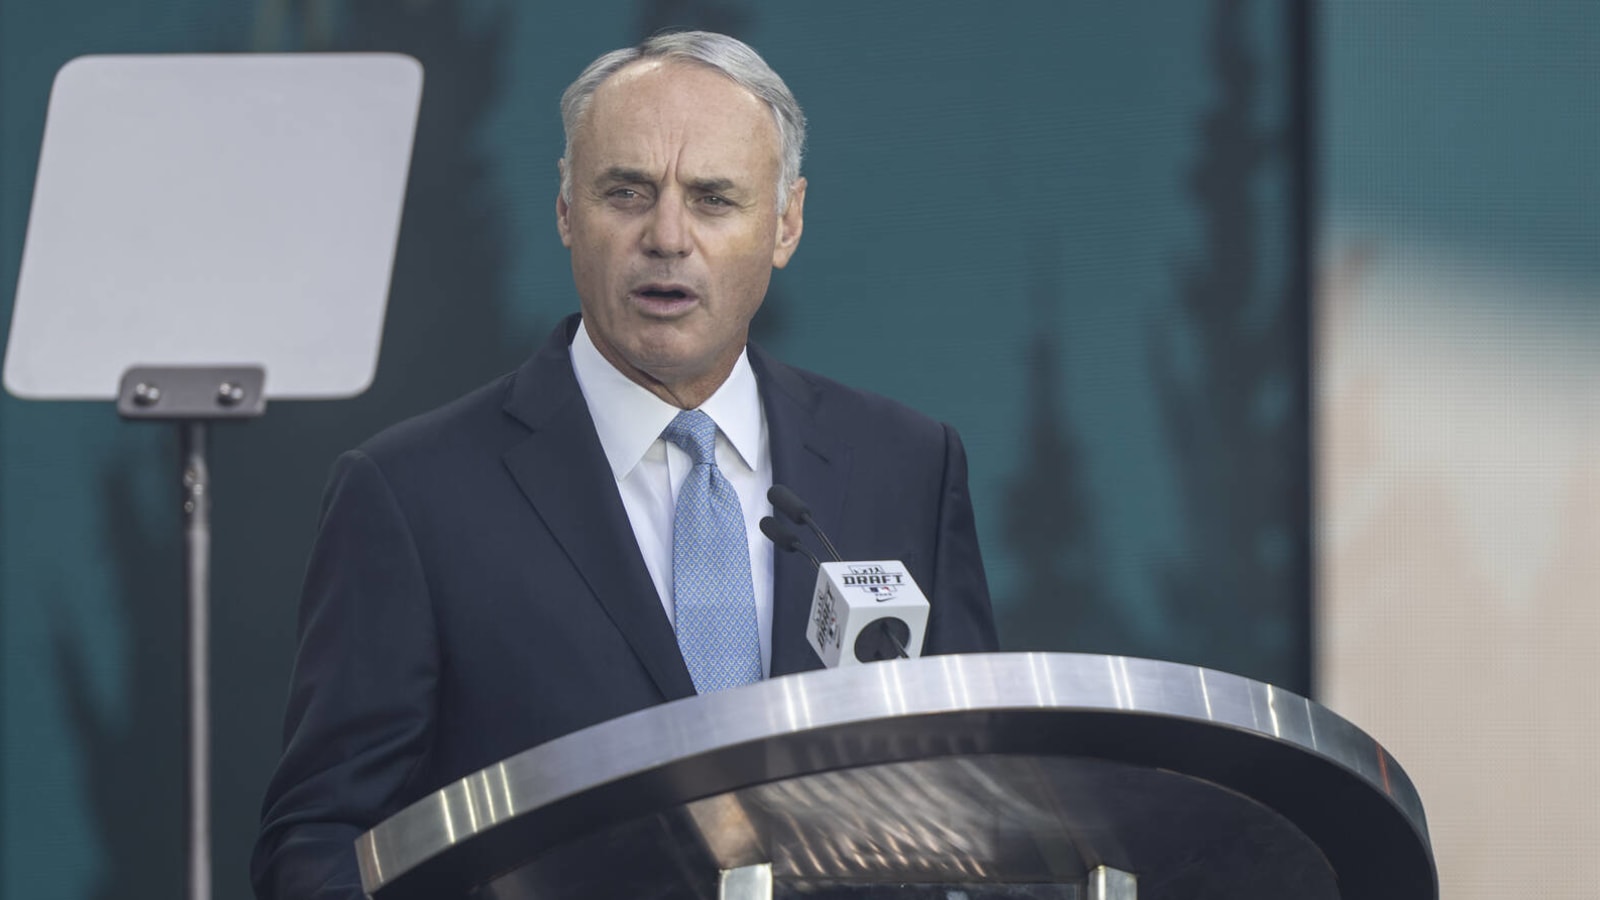 Watch: MLB commissioner serenaded by unhappy fans